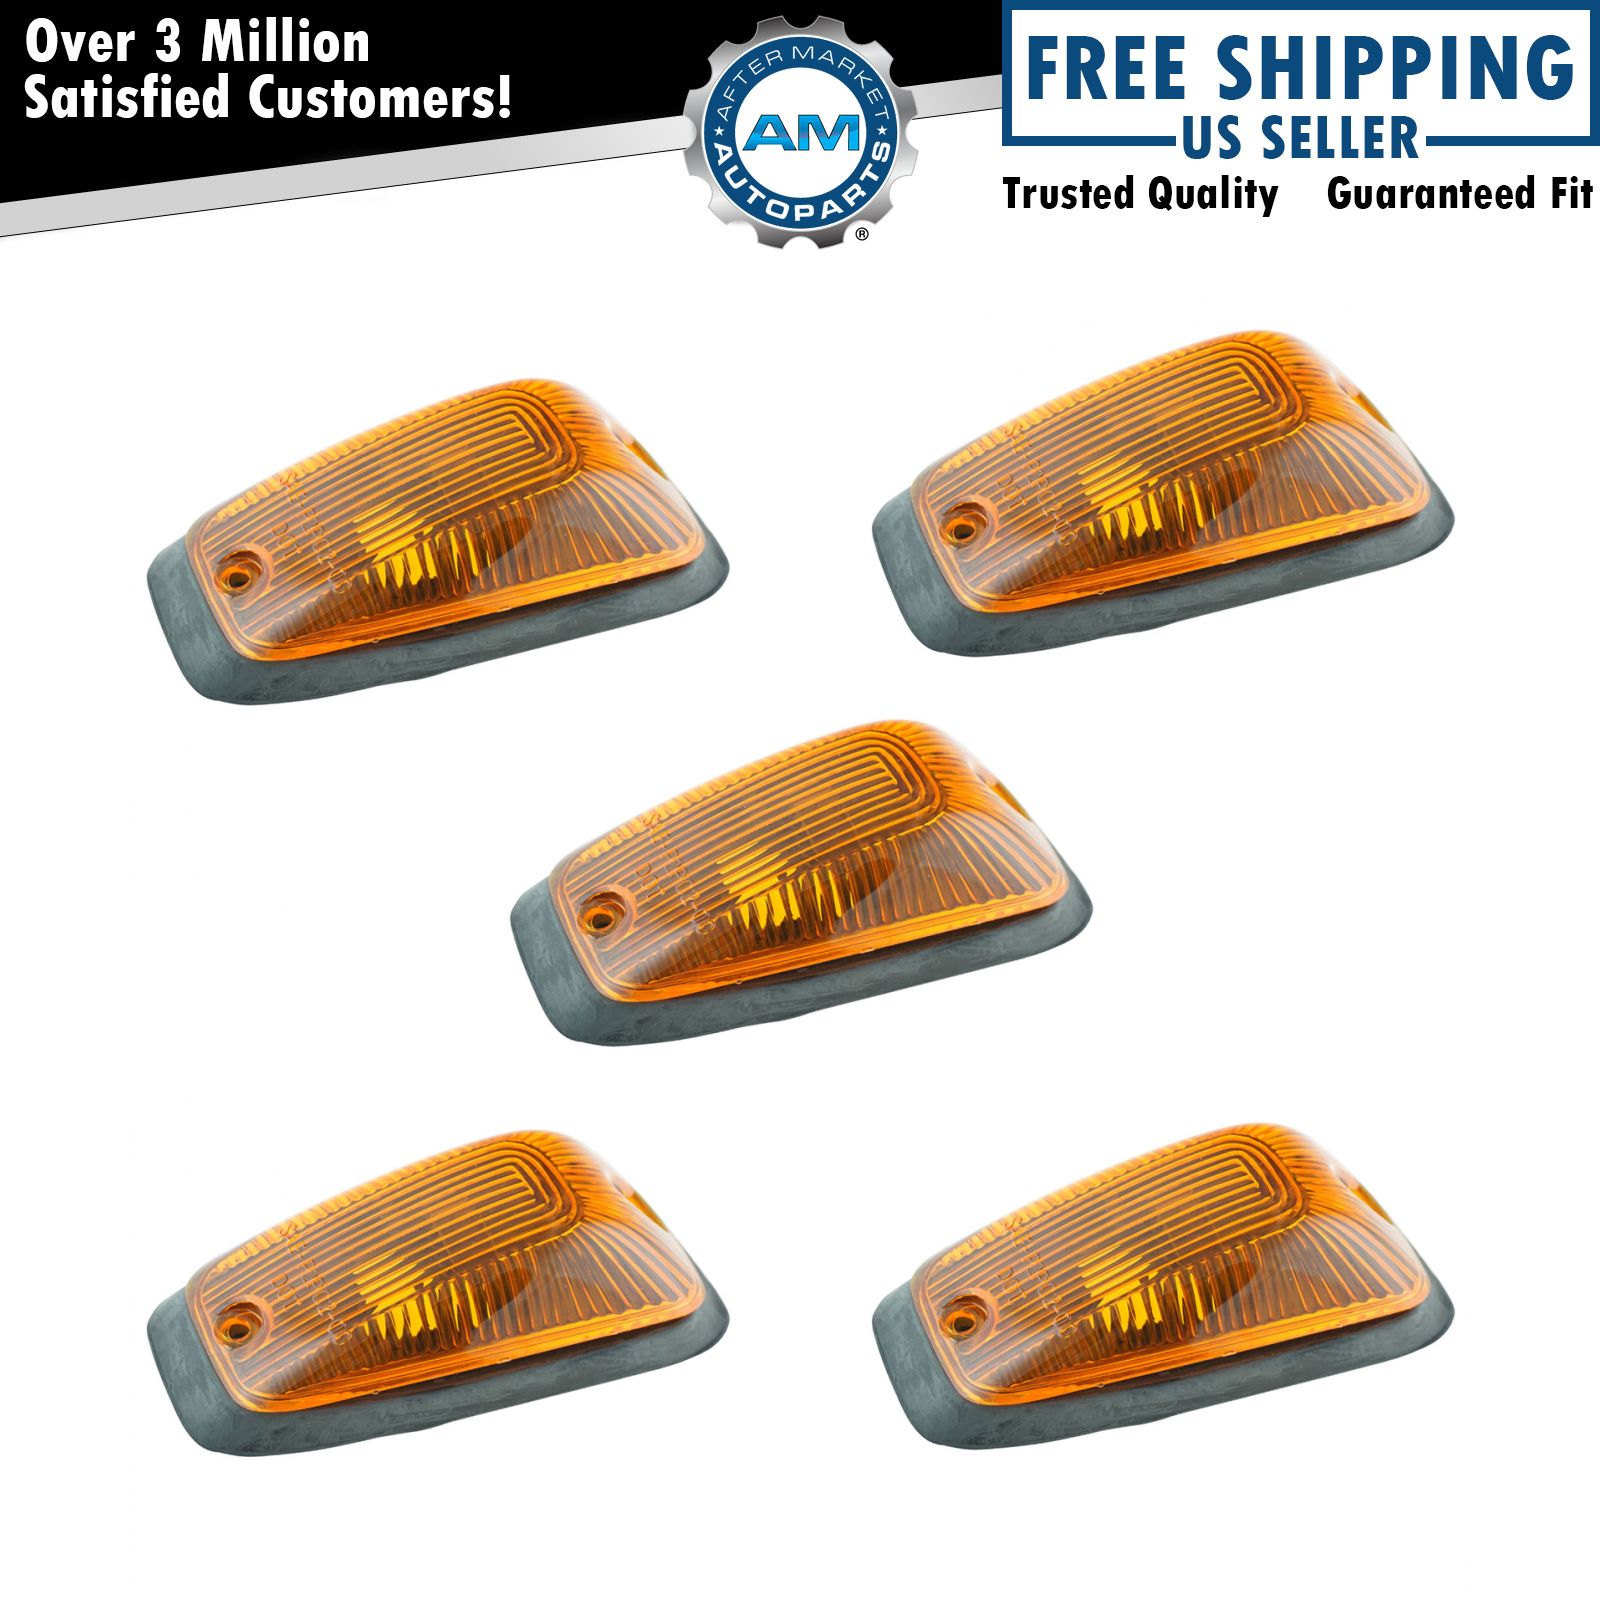 Dorman Cab Roof Parking Marker Clearance Lights 5 Piece Kit for Chevy GMC Truck